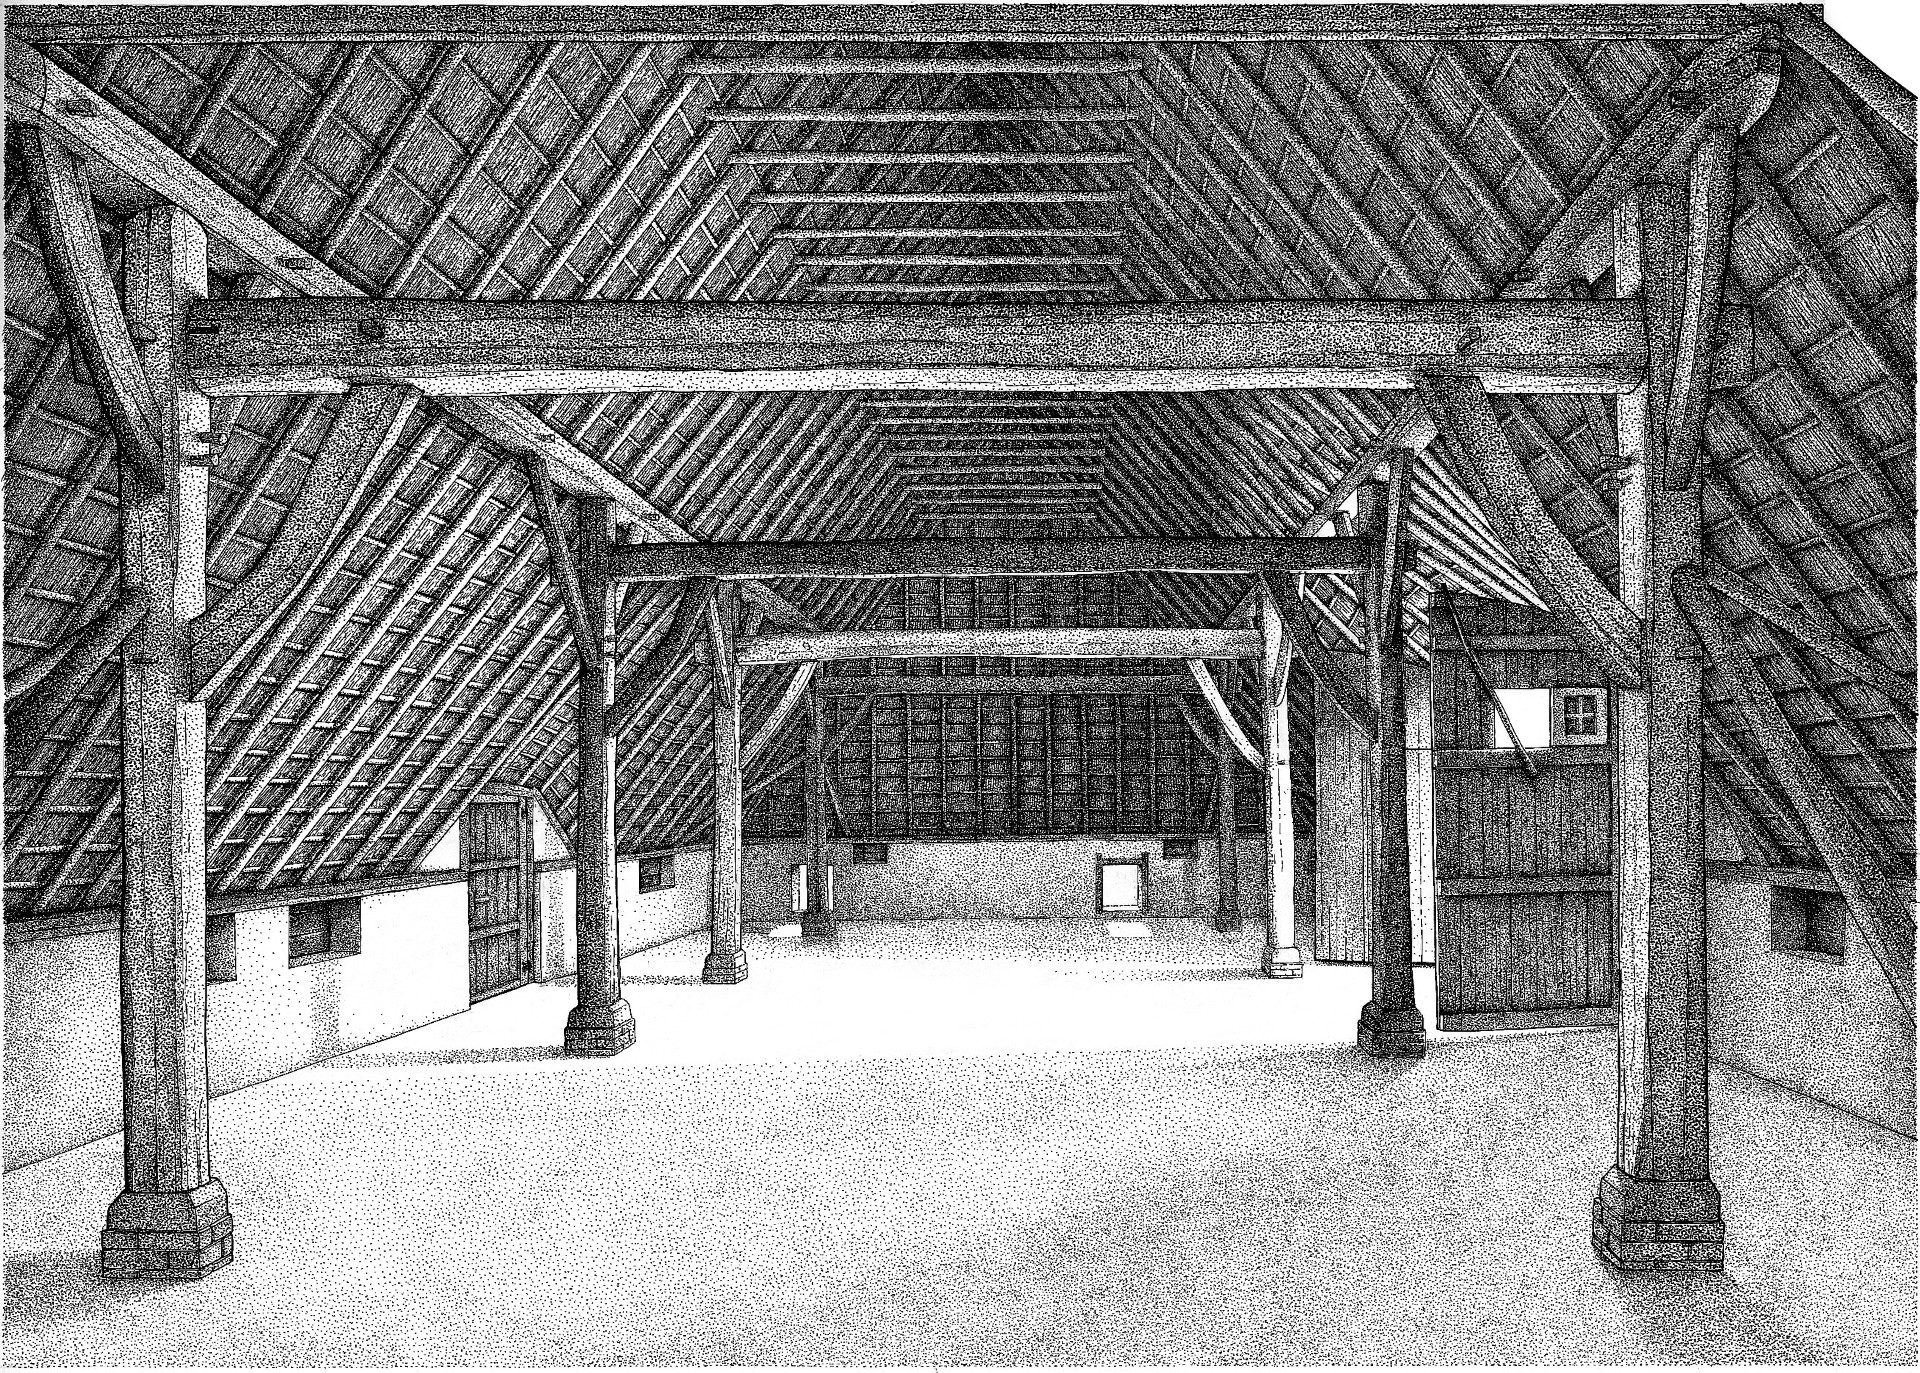 Interior mid-cross section shed